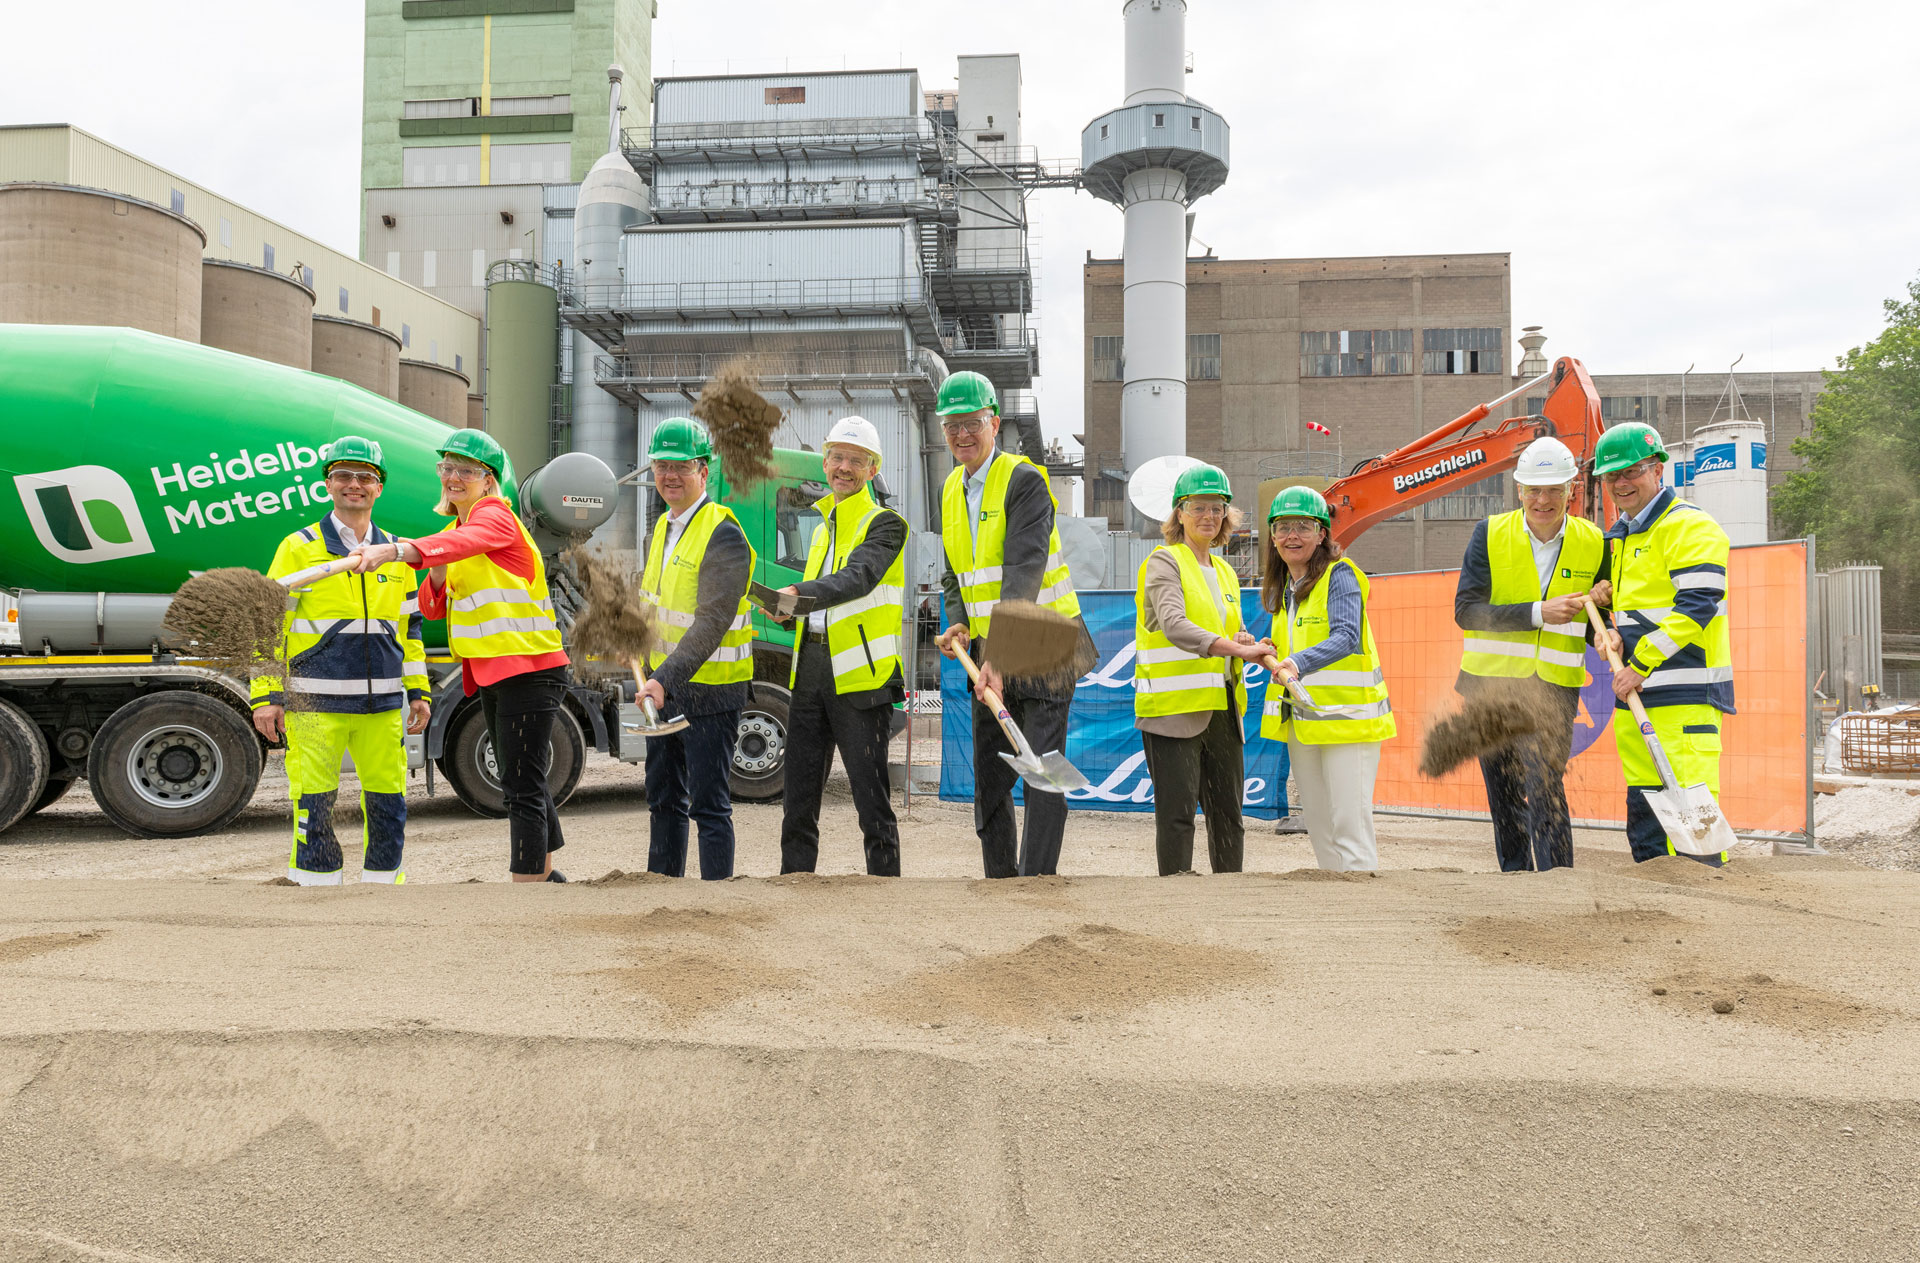 Plant site with 9 people in protective clothing and shovels in hand in front of a pile of sand